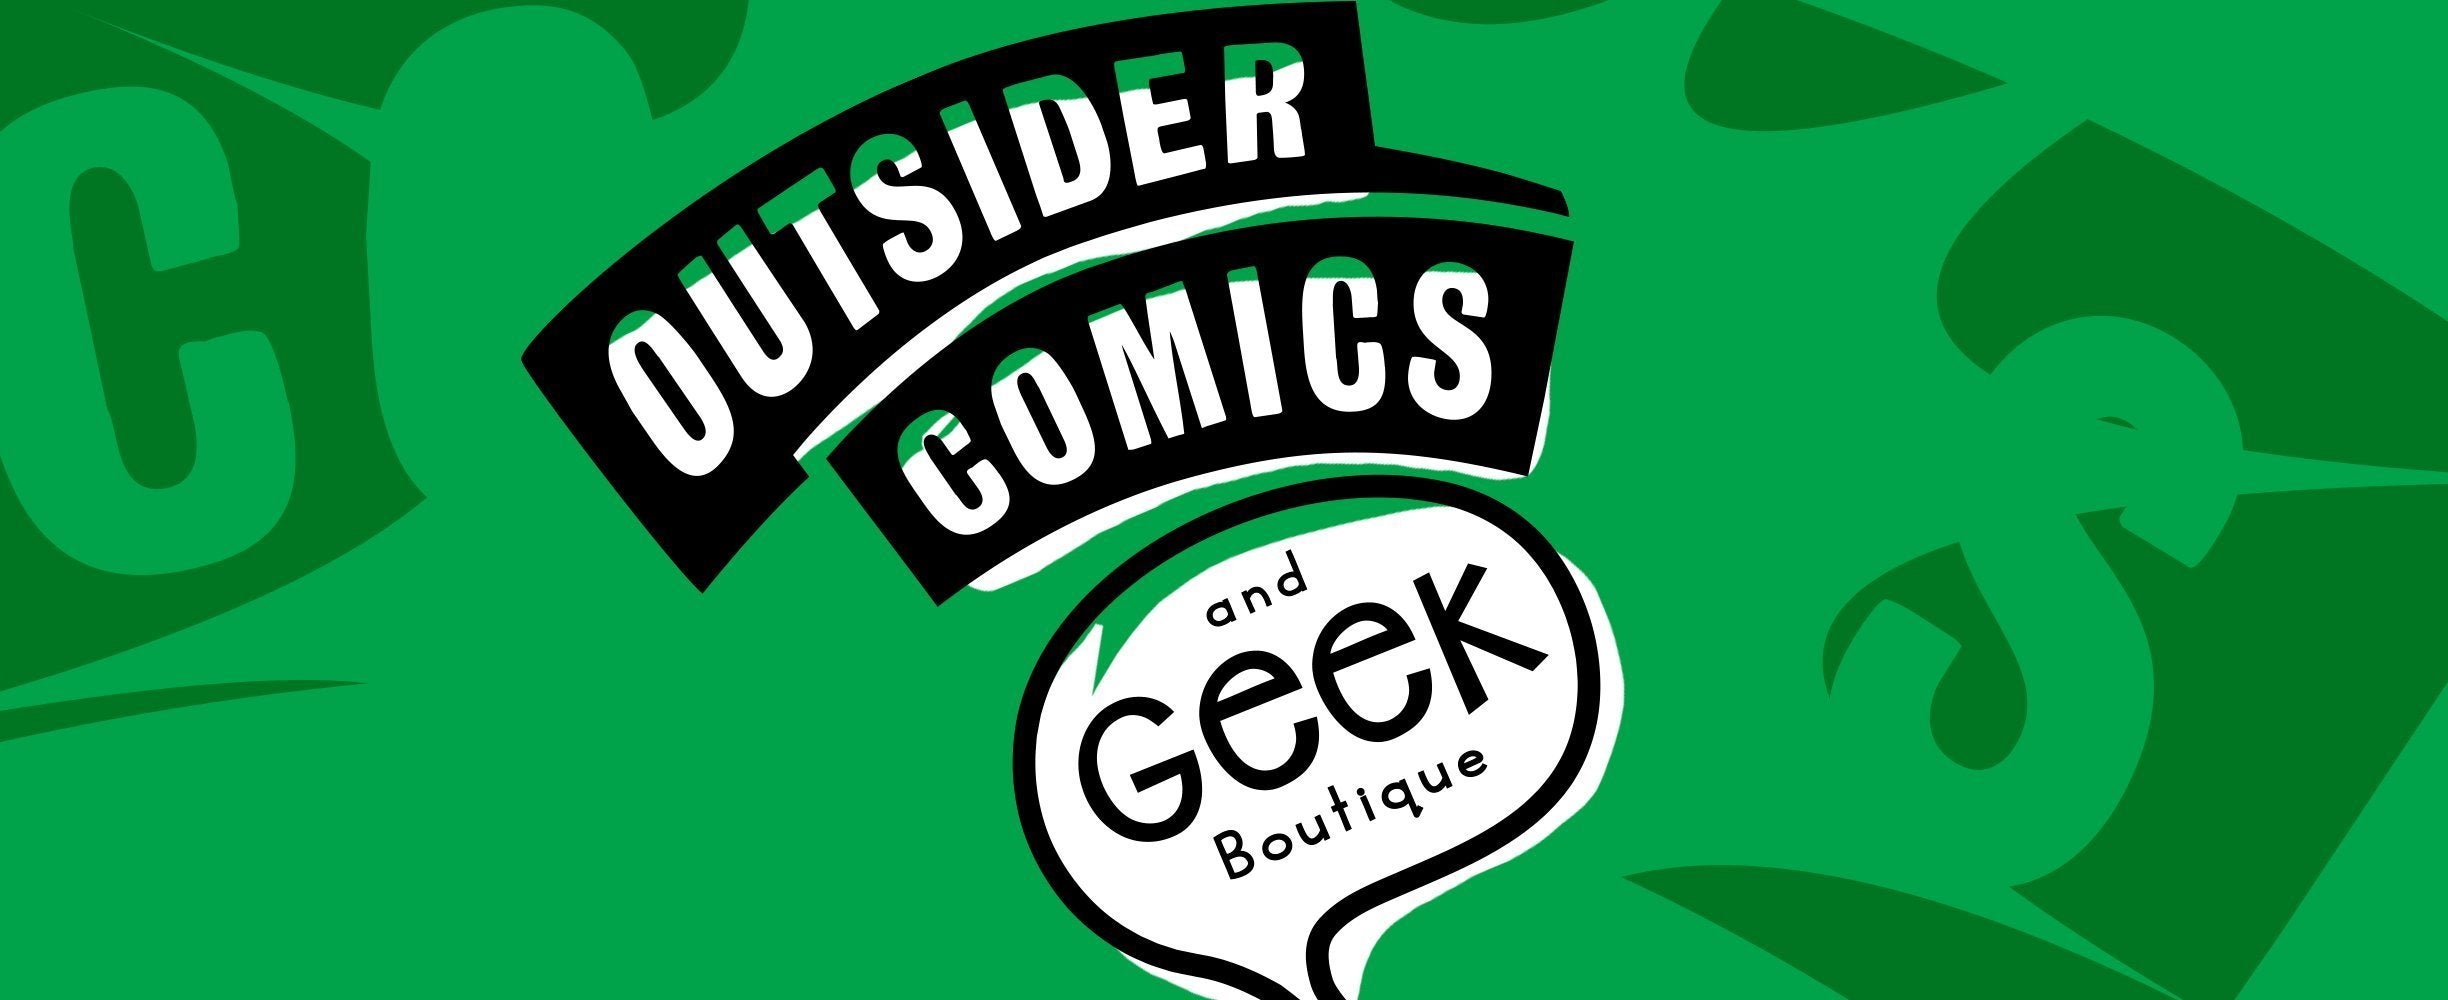 Here to Slay – Outsider Comics and Geek Boutique